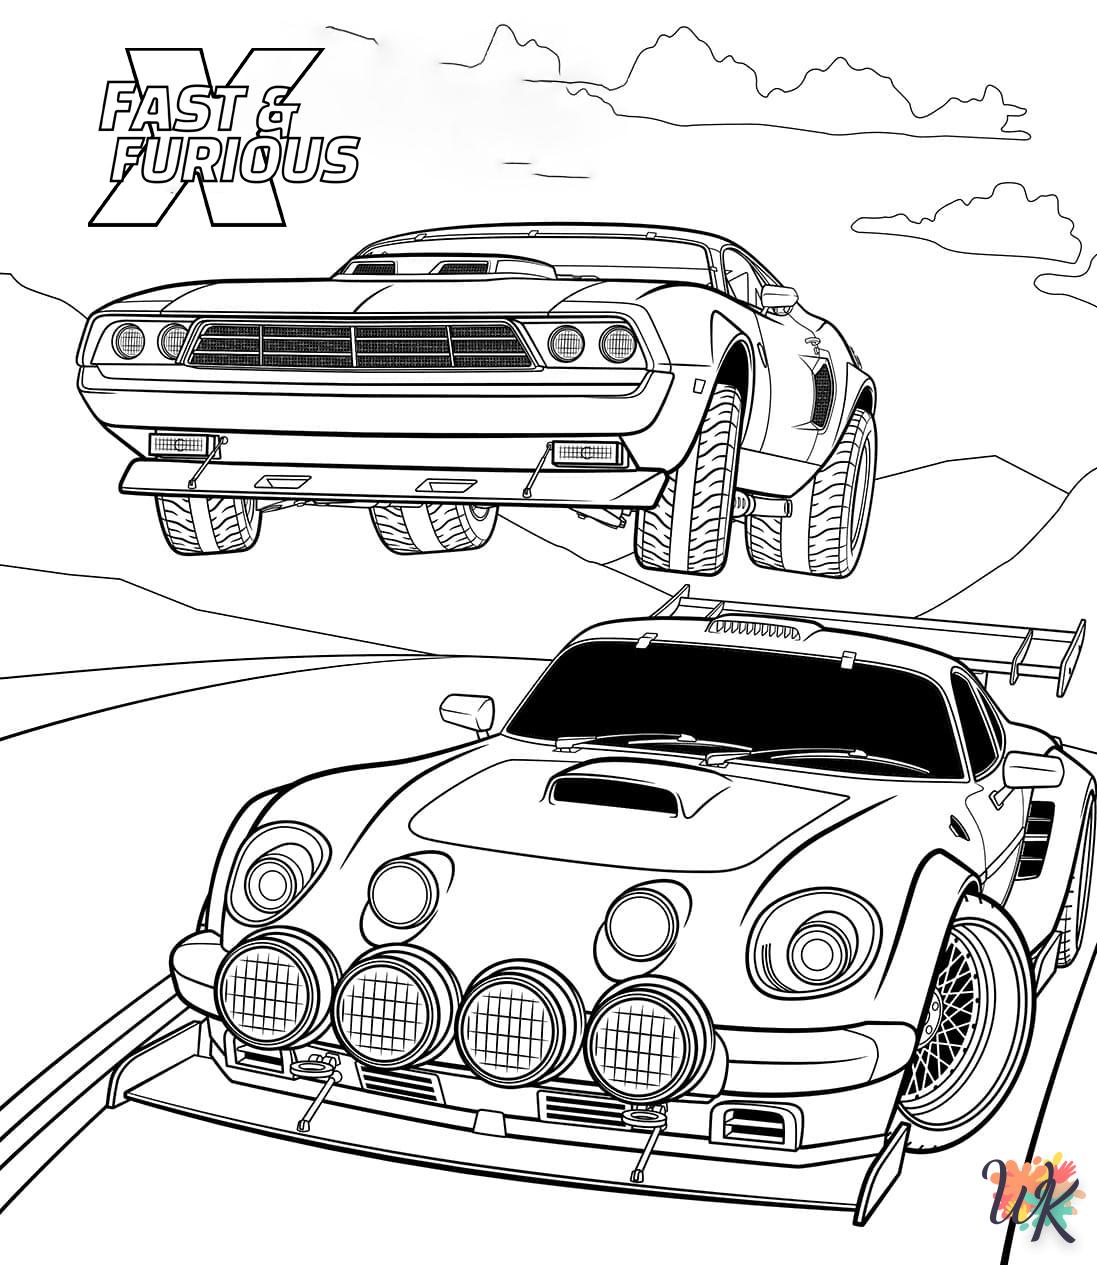 Fast And Furious 10 coloring pages for preschoolers